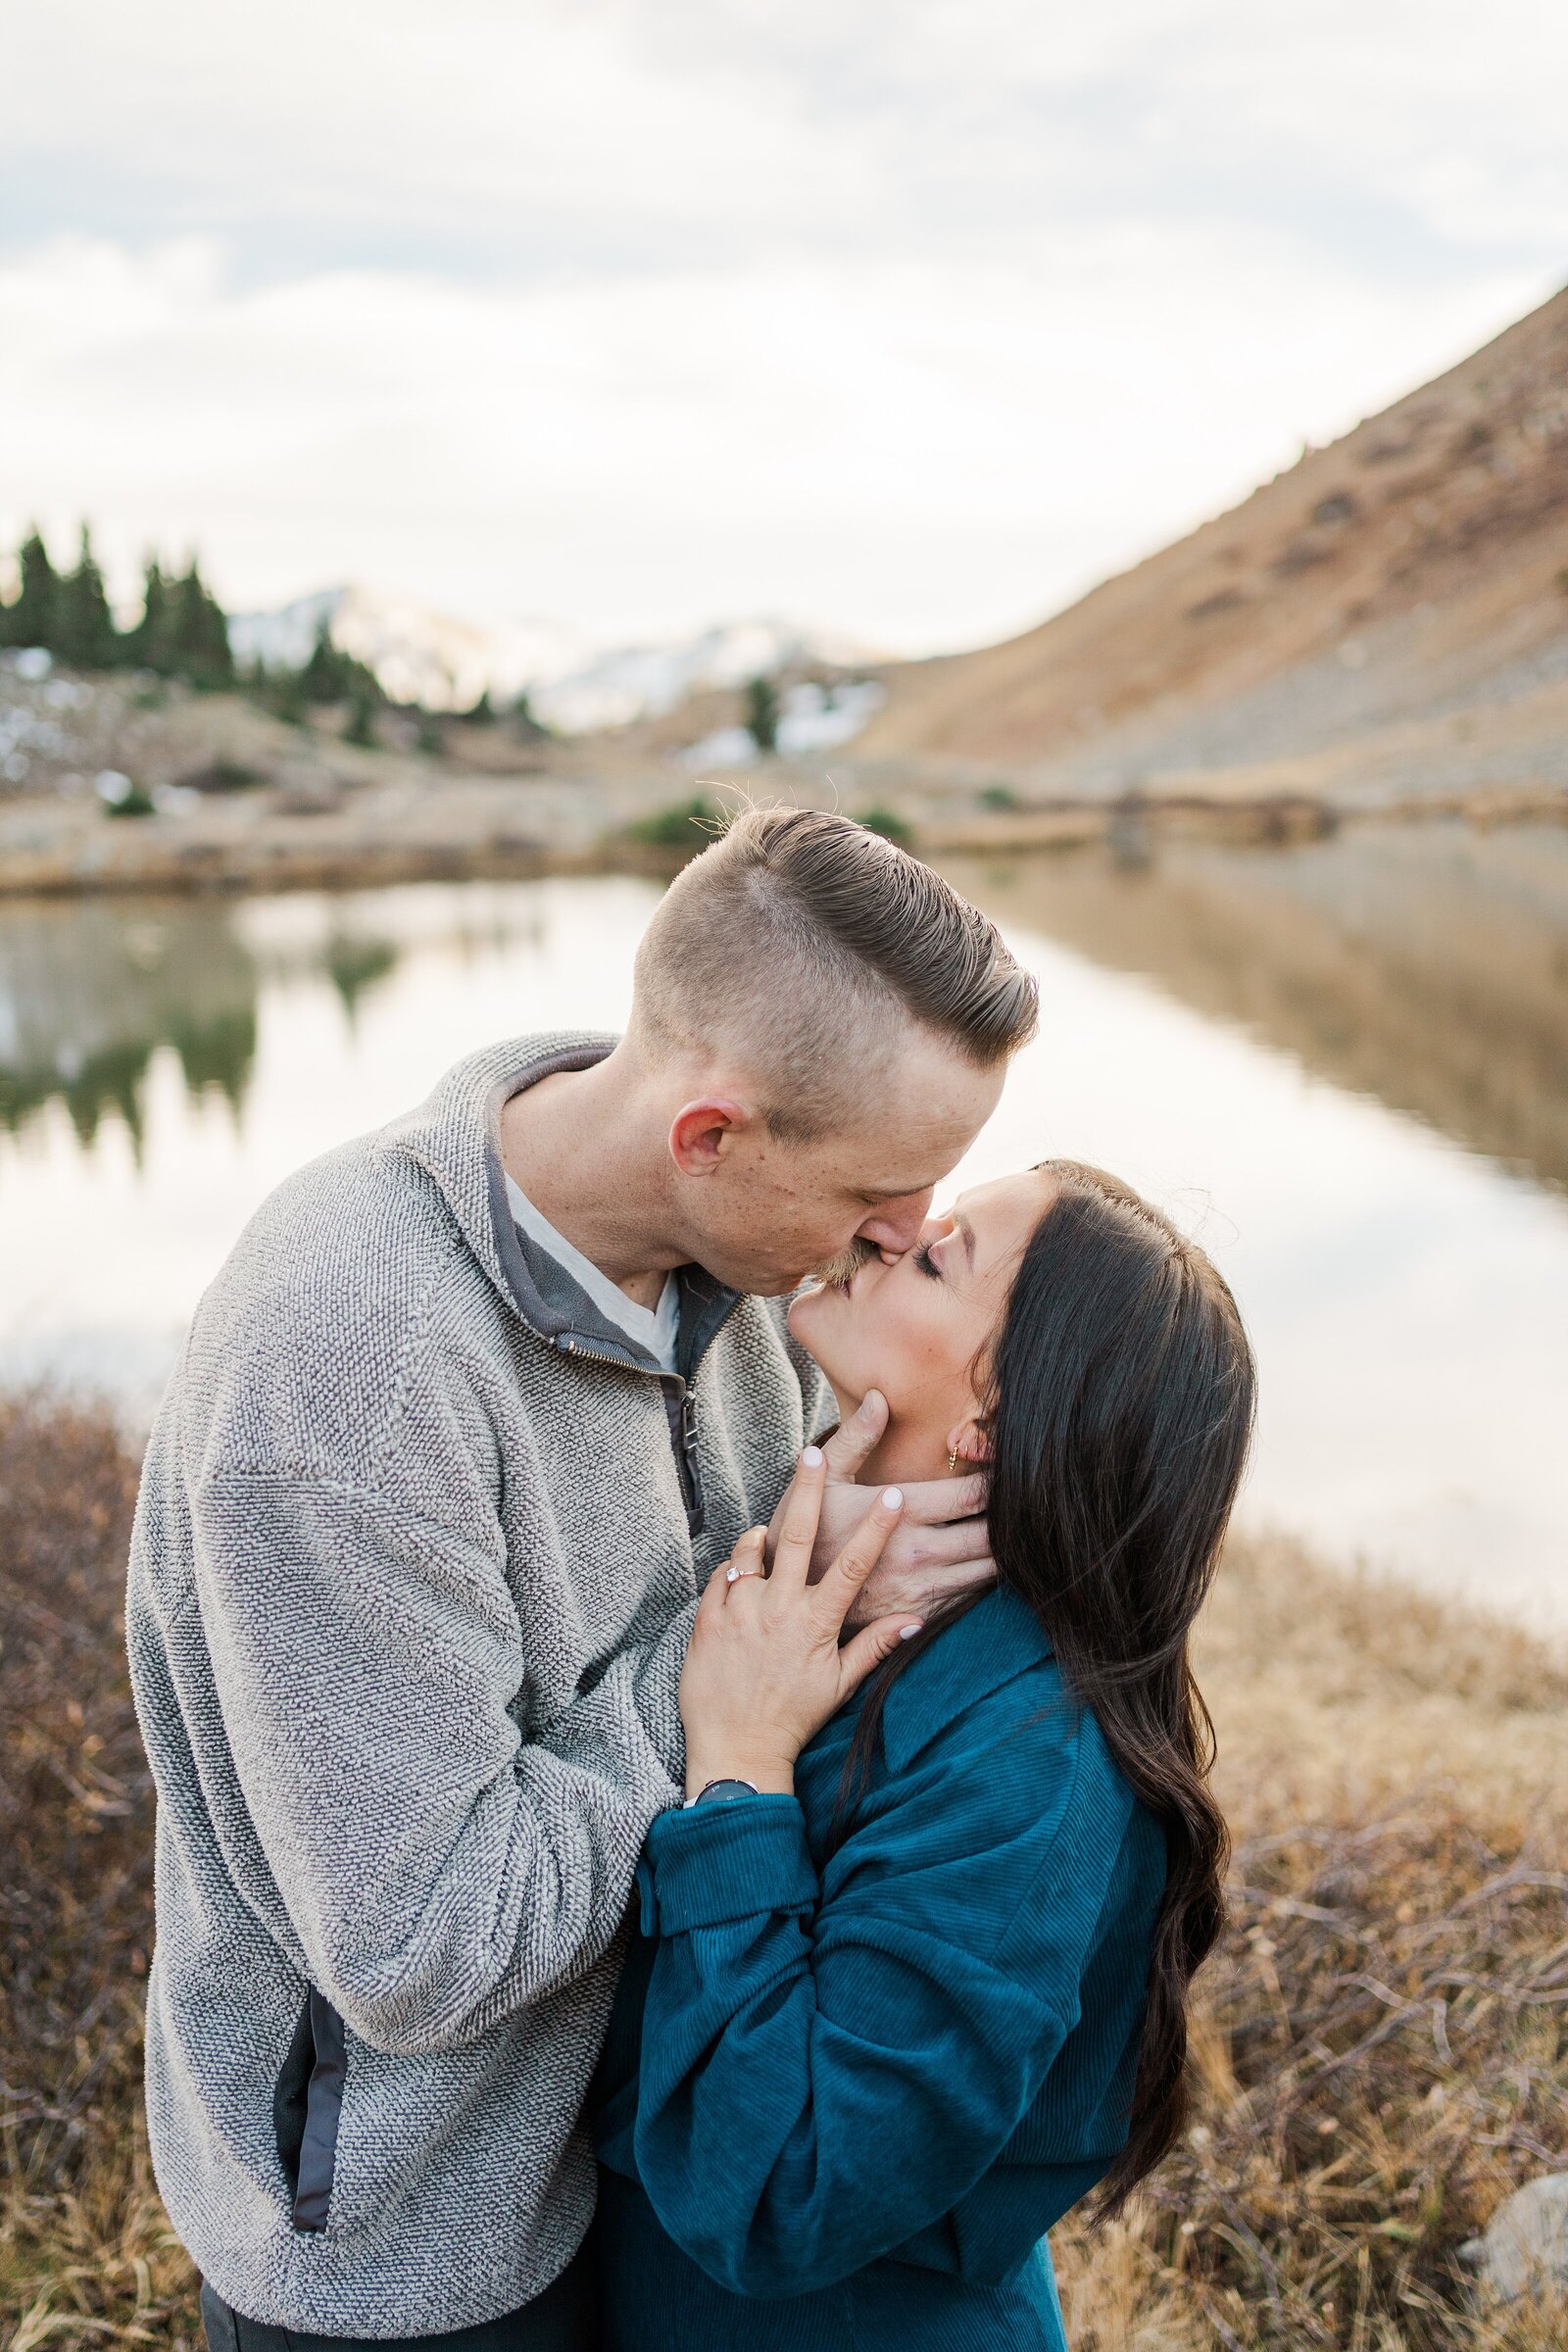 Experience the thrill of an adventurous elopement with breathtaking views in the Rocky Mountains. Samantha Immer captures the magic of your love story in a stunning natural setting.